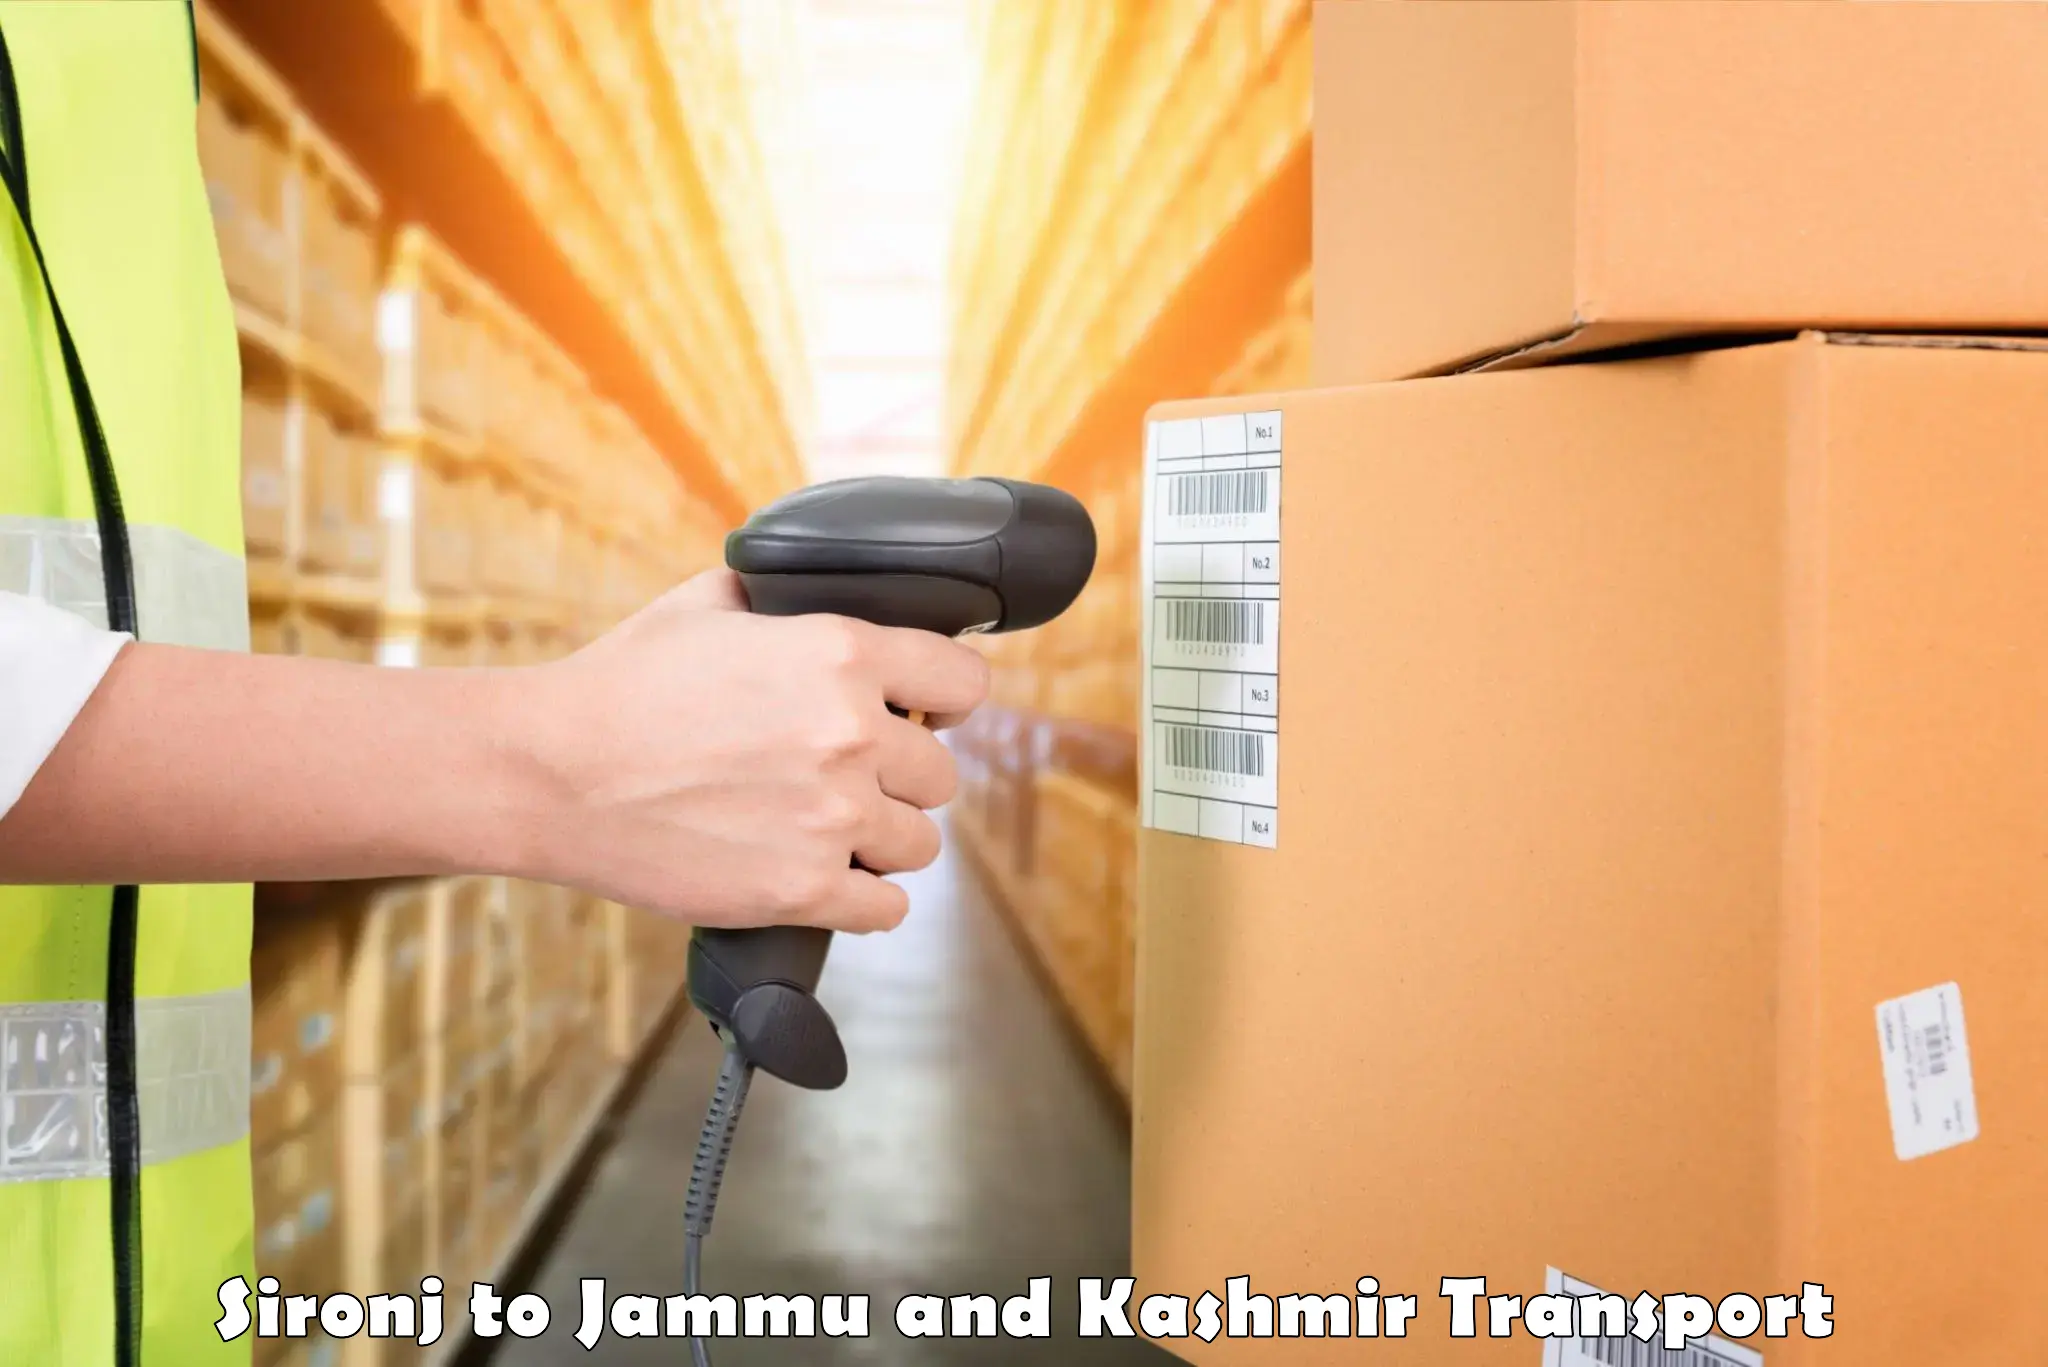 Express transport services in Sironj to Anantnag